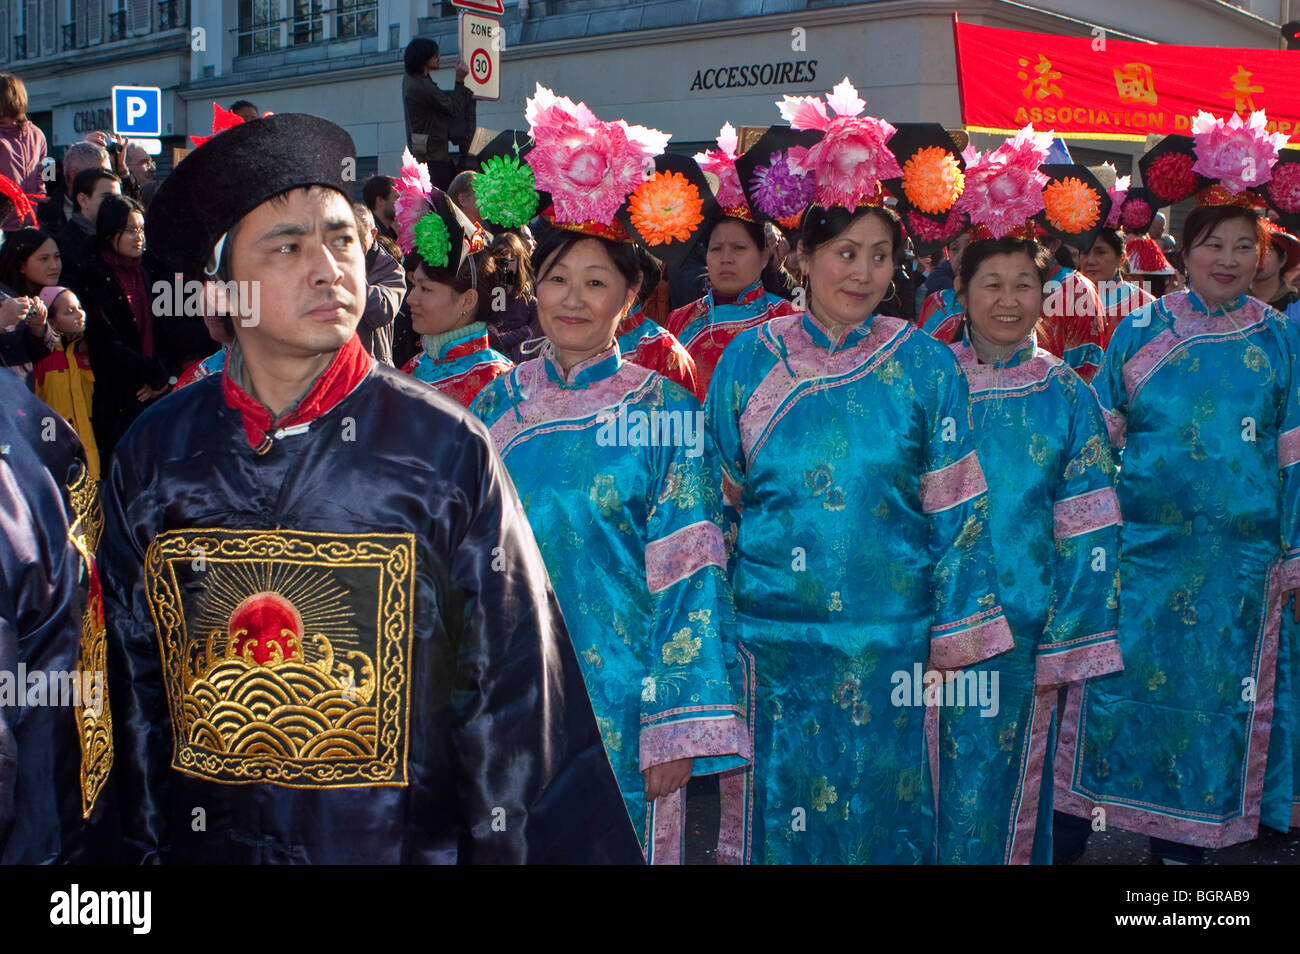 Paris, France, French Chinese Large Crowd People, Marching in Costume, Parade in 'Chinese new year' Carnival in Street, WOMEN IN  crowd faces, Chinese migrants and europe Stock Photo